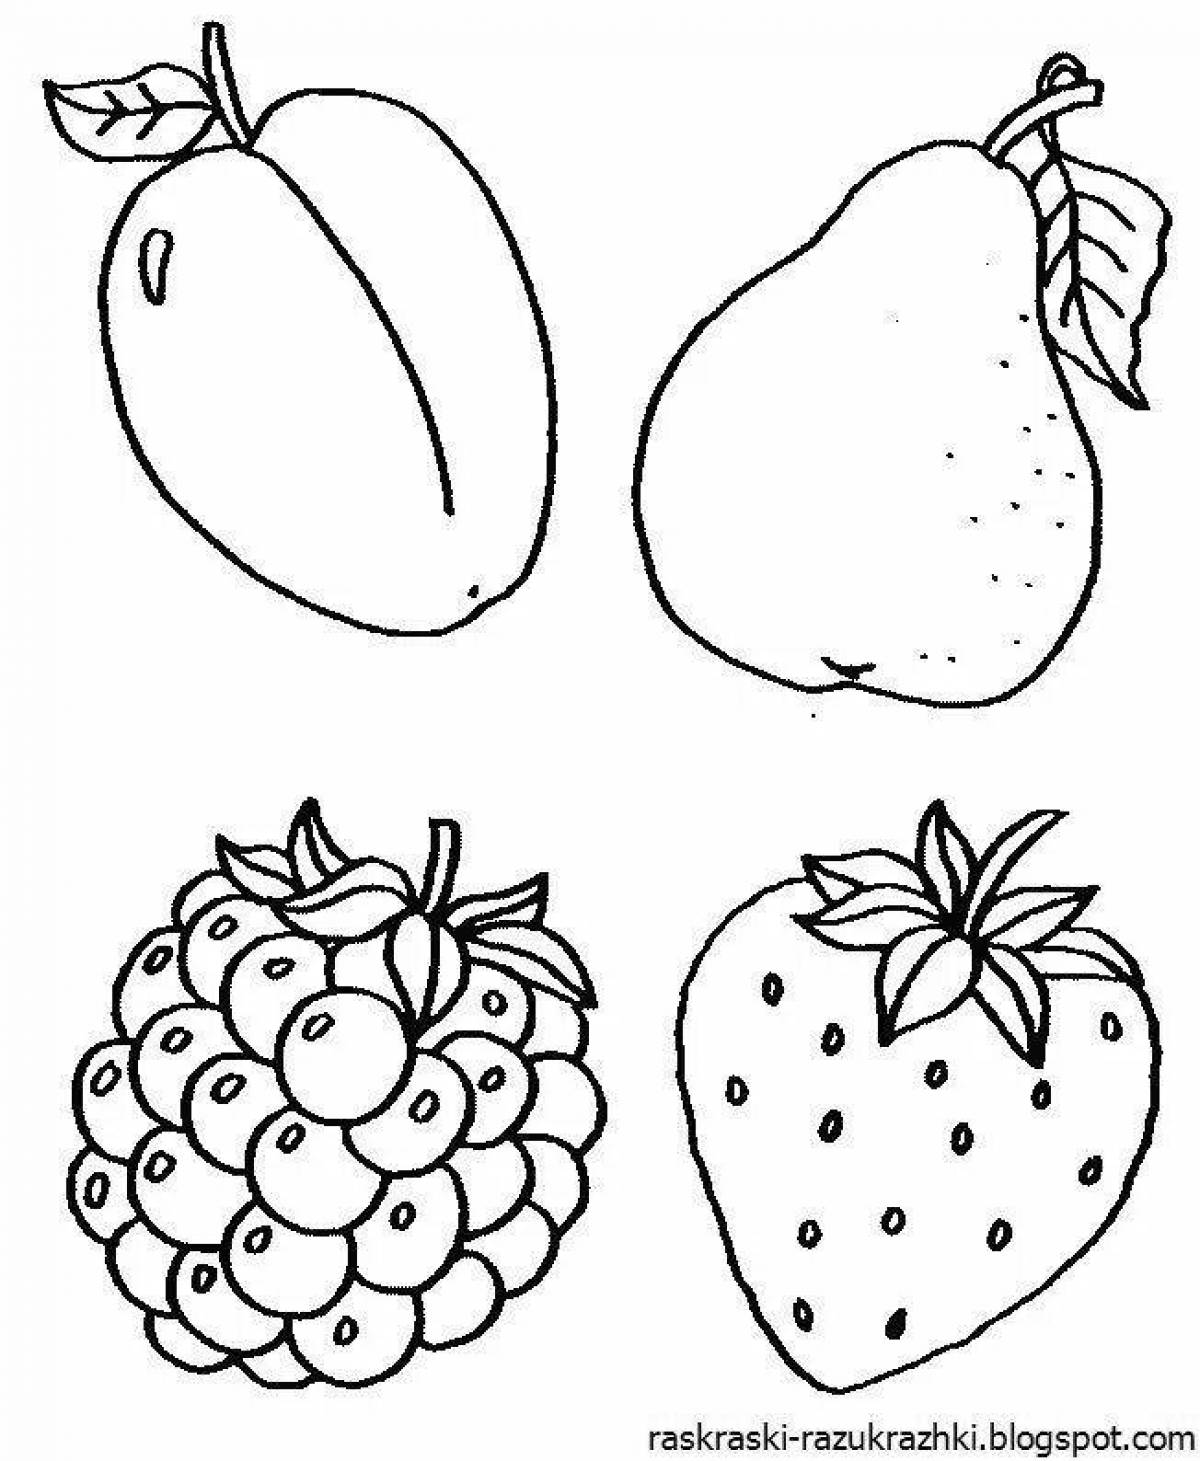 Nutritious berries and fruits coloring book